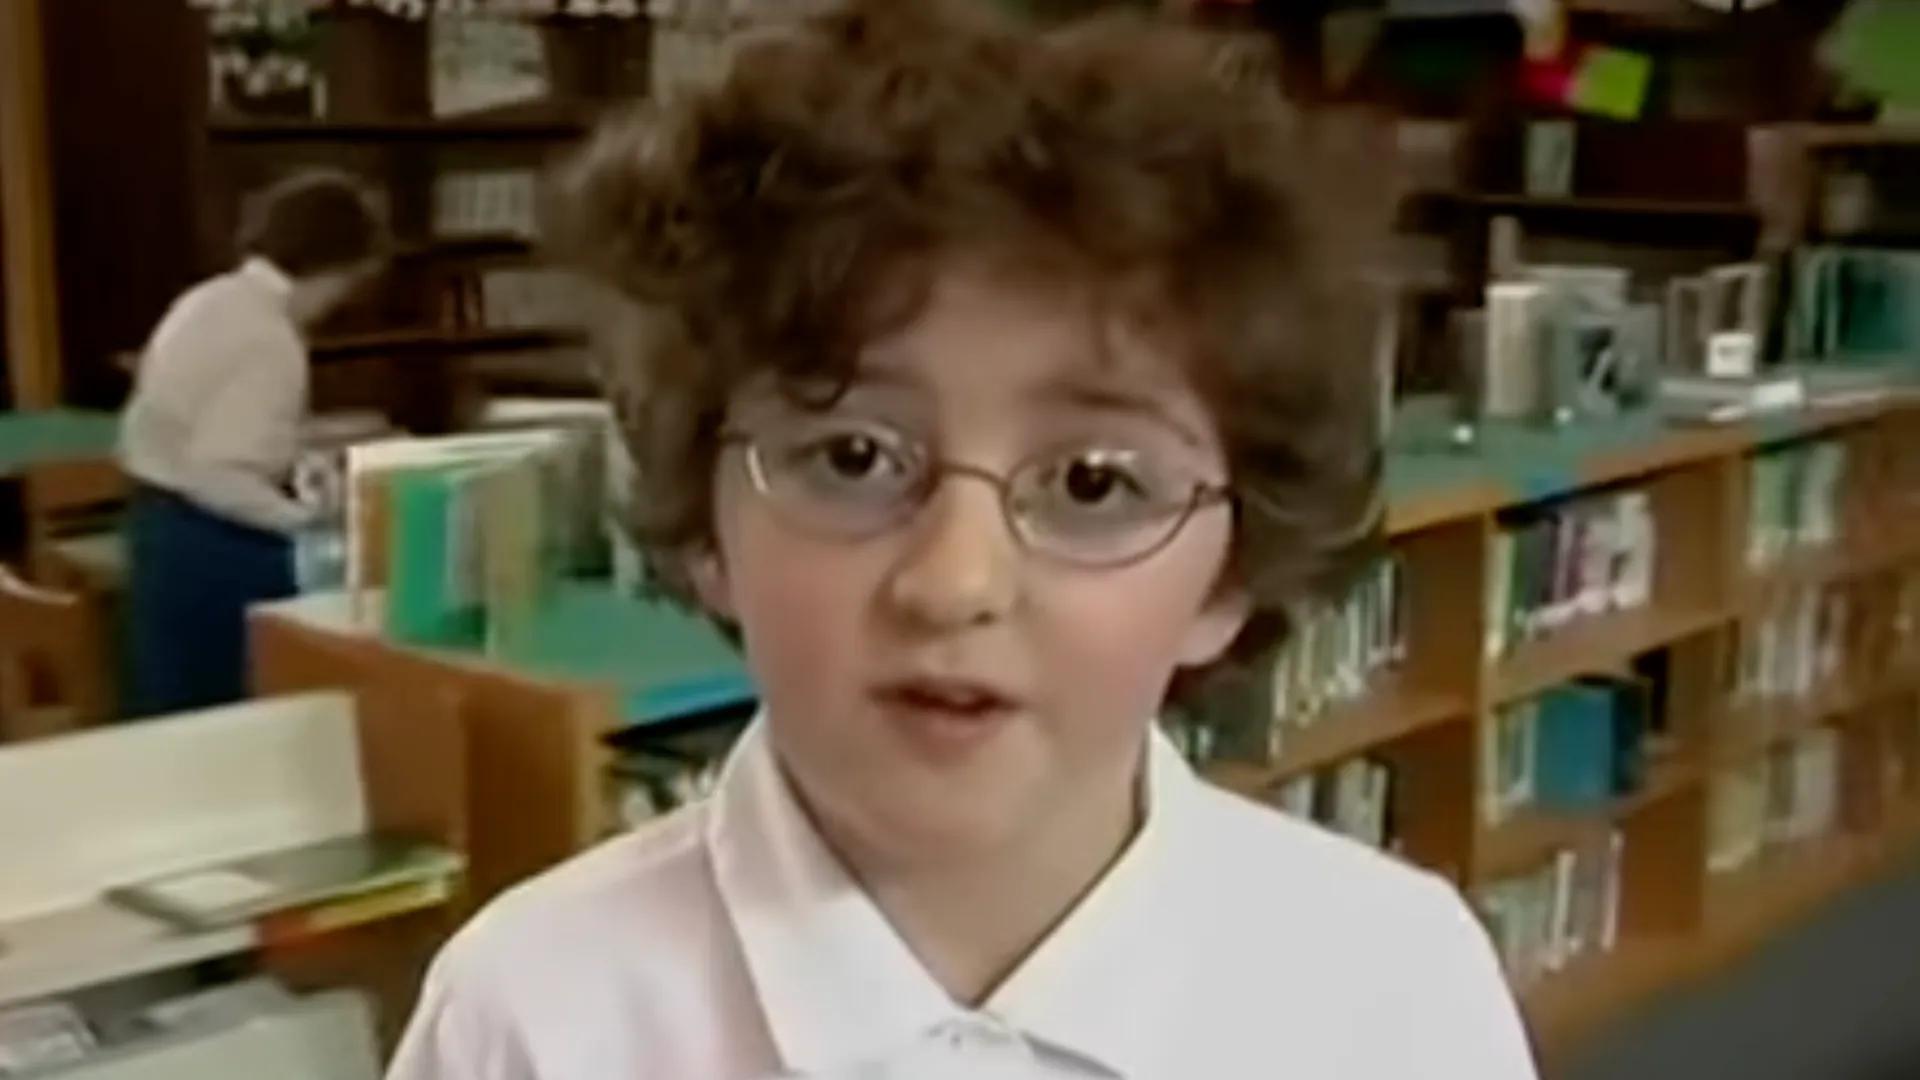 "Caroline" from a 2003 episode of "Arthur," believed to be a young Caroline Ellison. Image: YouTube